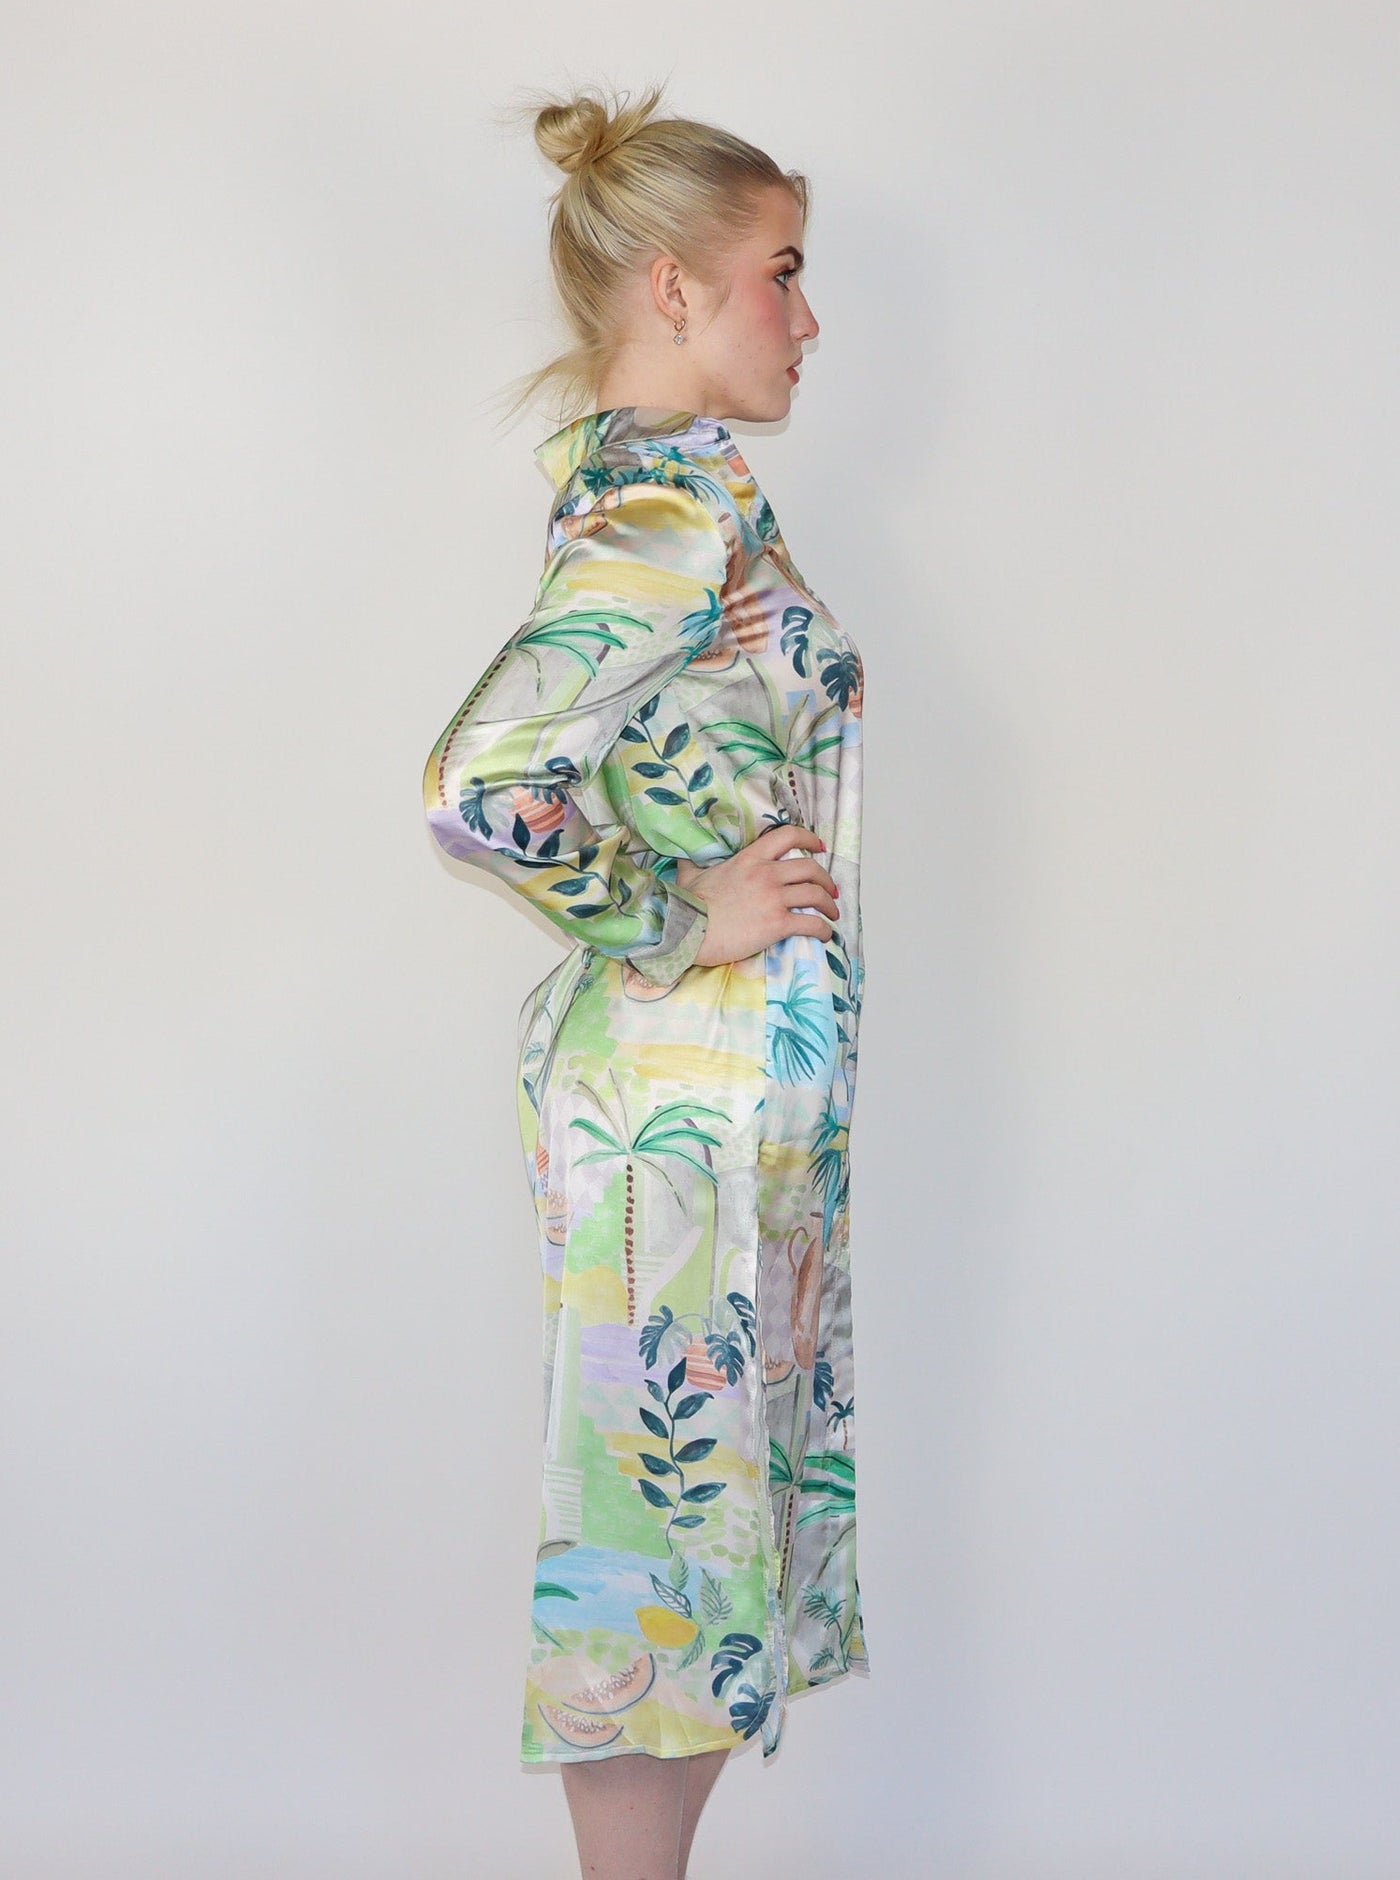 Model is wearing a long sleeve spring themed dress with multi color print. The dress buttons up in the front and has slits at the thighs on both sides. Dress is paired with white sneakers.